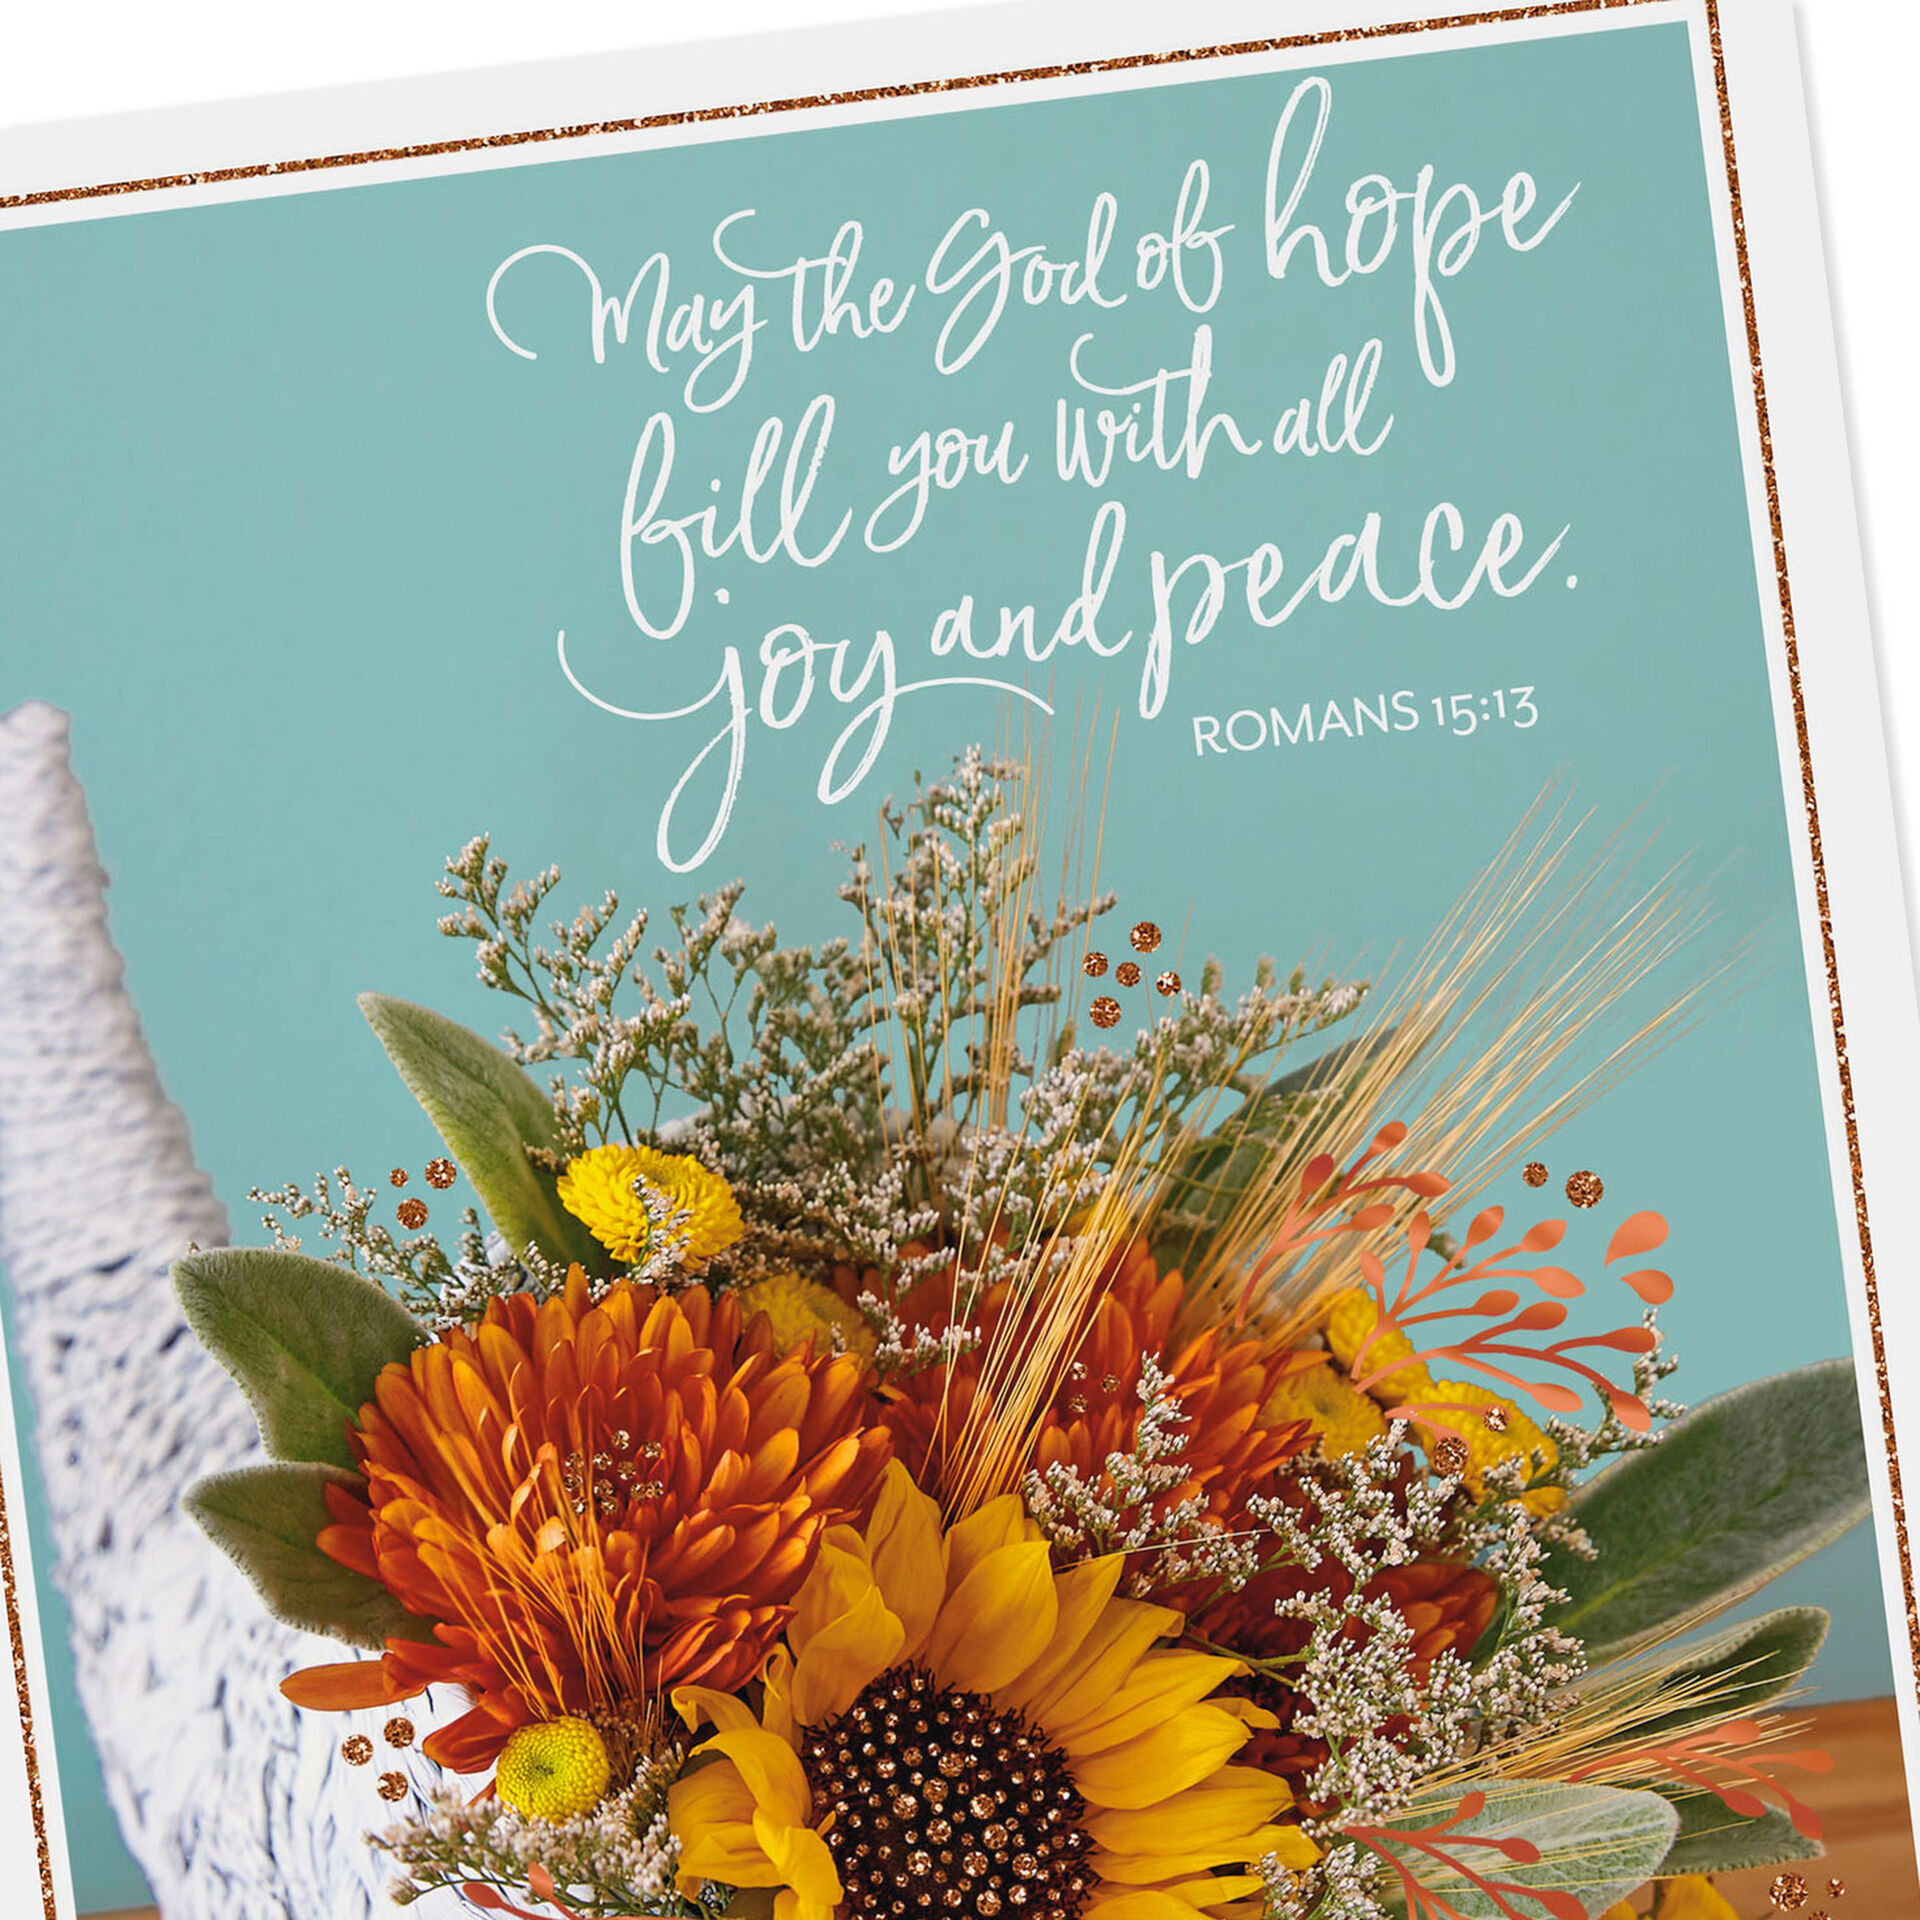 thanking-the-lord-for-you-religious-thanksgiving-card-greeting-cards